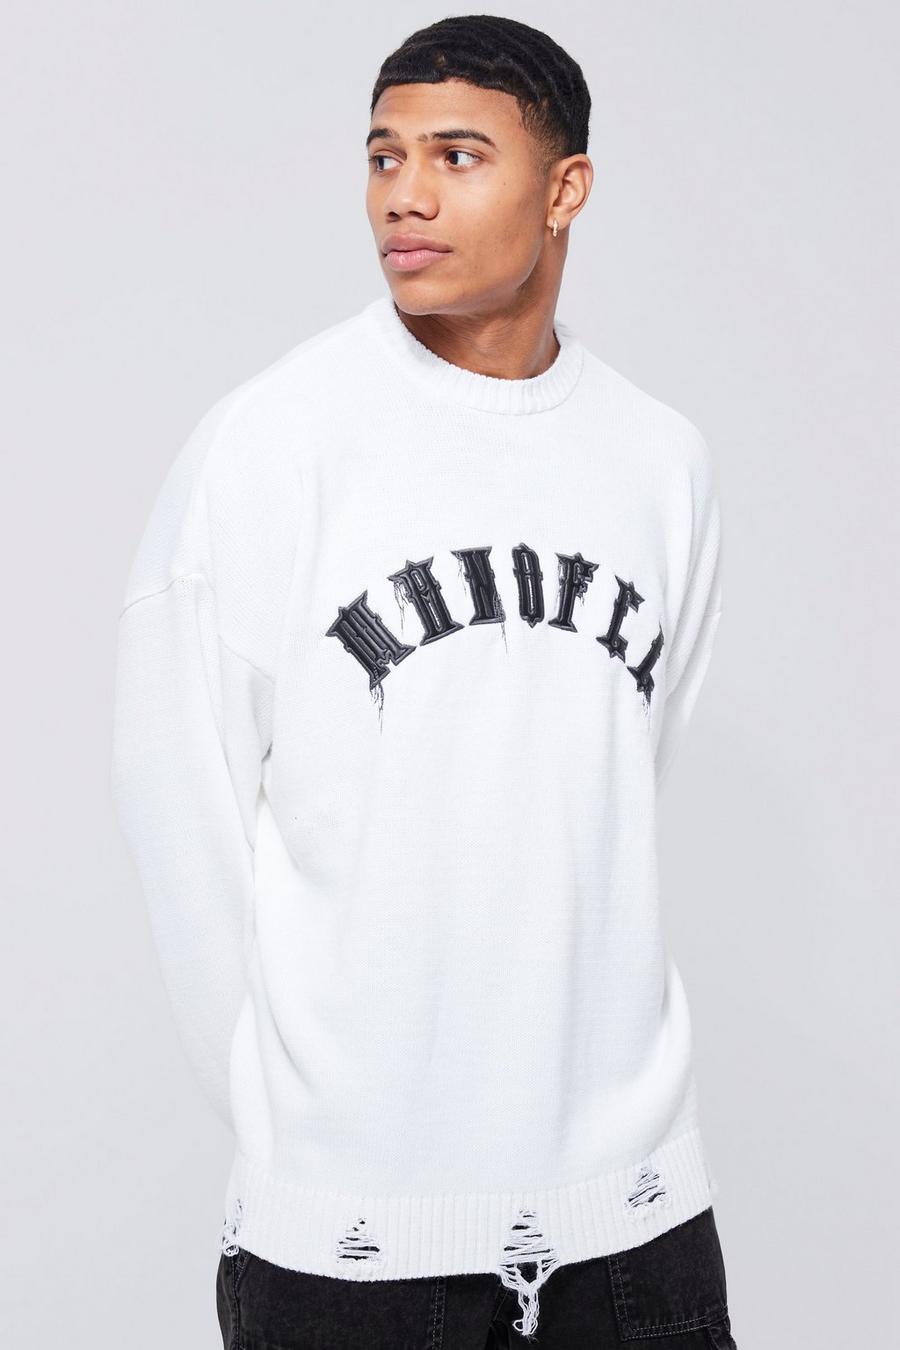 PU Man Official Strickpullover, White